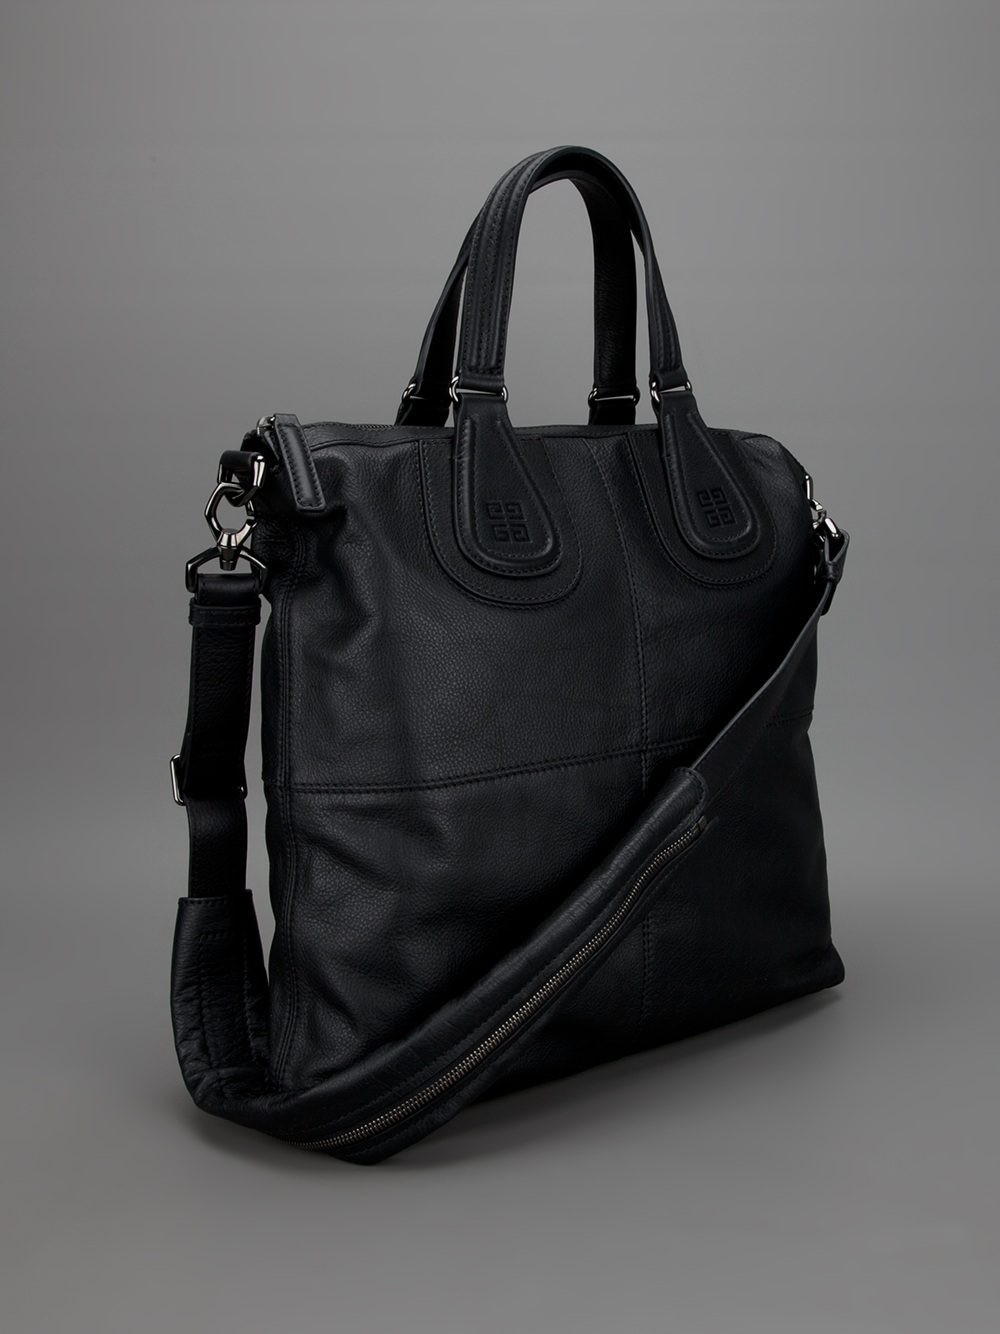 Givenchy Tote Bag in Black for Men - Lyst